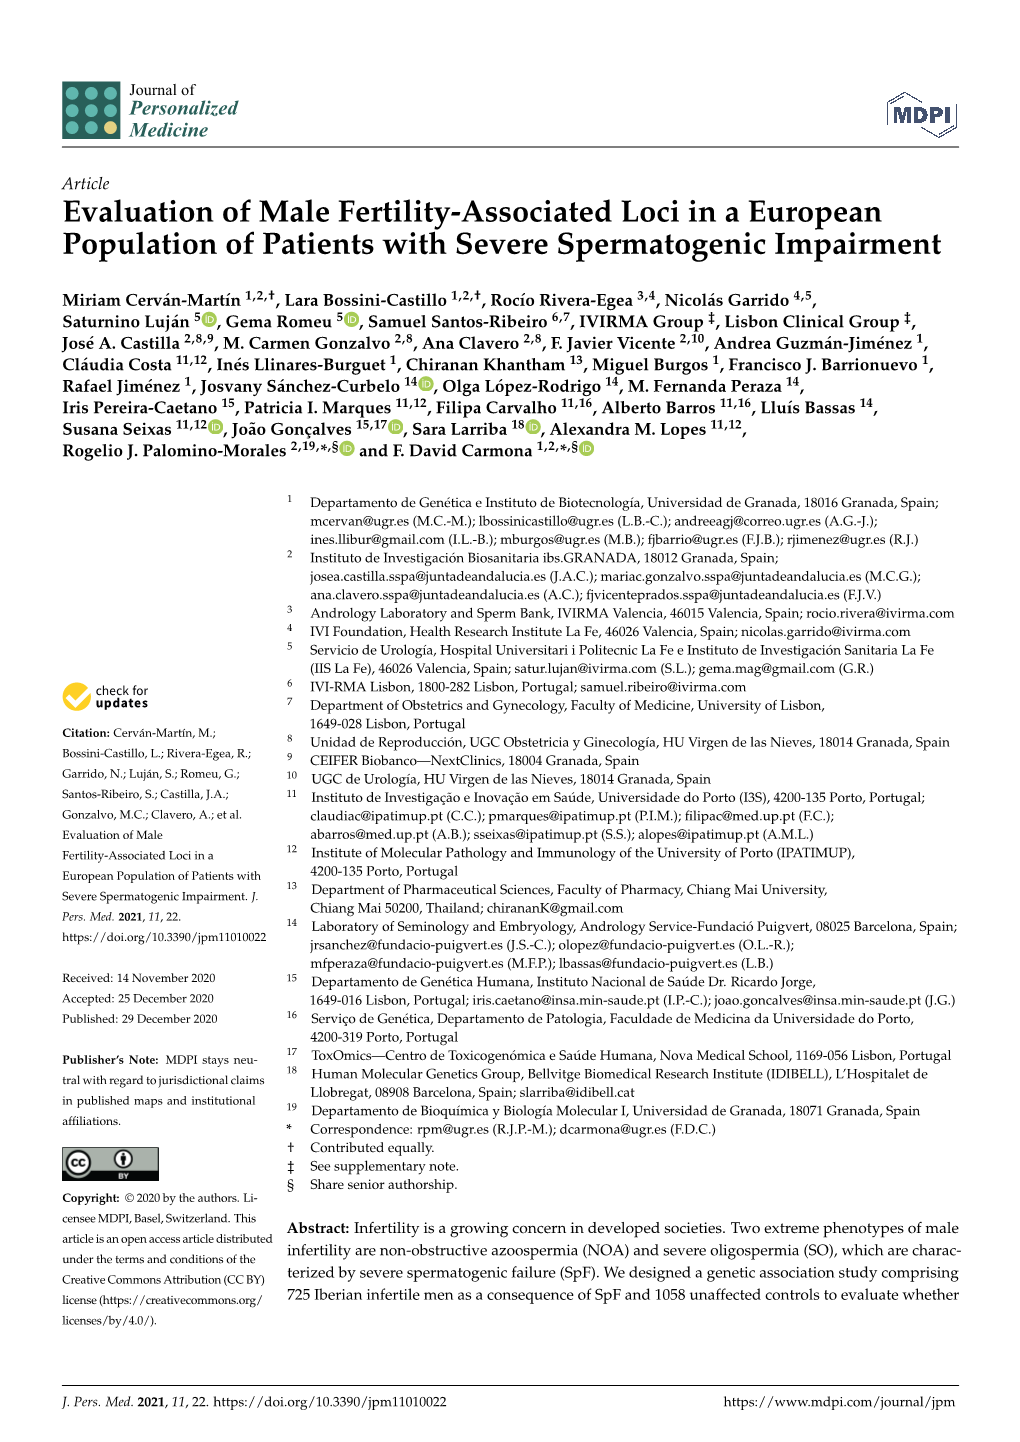 Evaluation of Male Fertility-Associated Loci in a European Population of Patients with Severe Spermatogenic Impairment